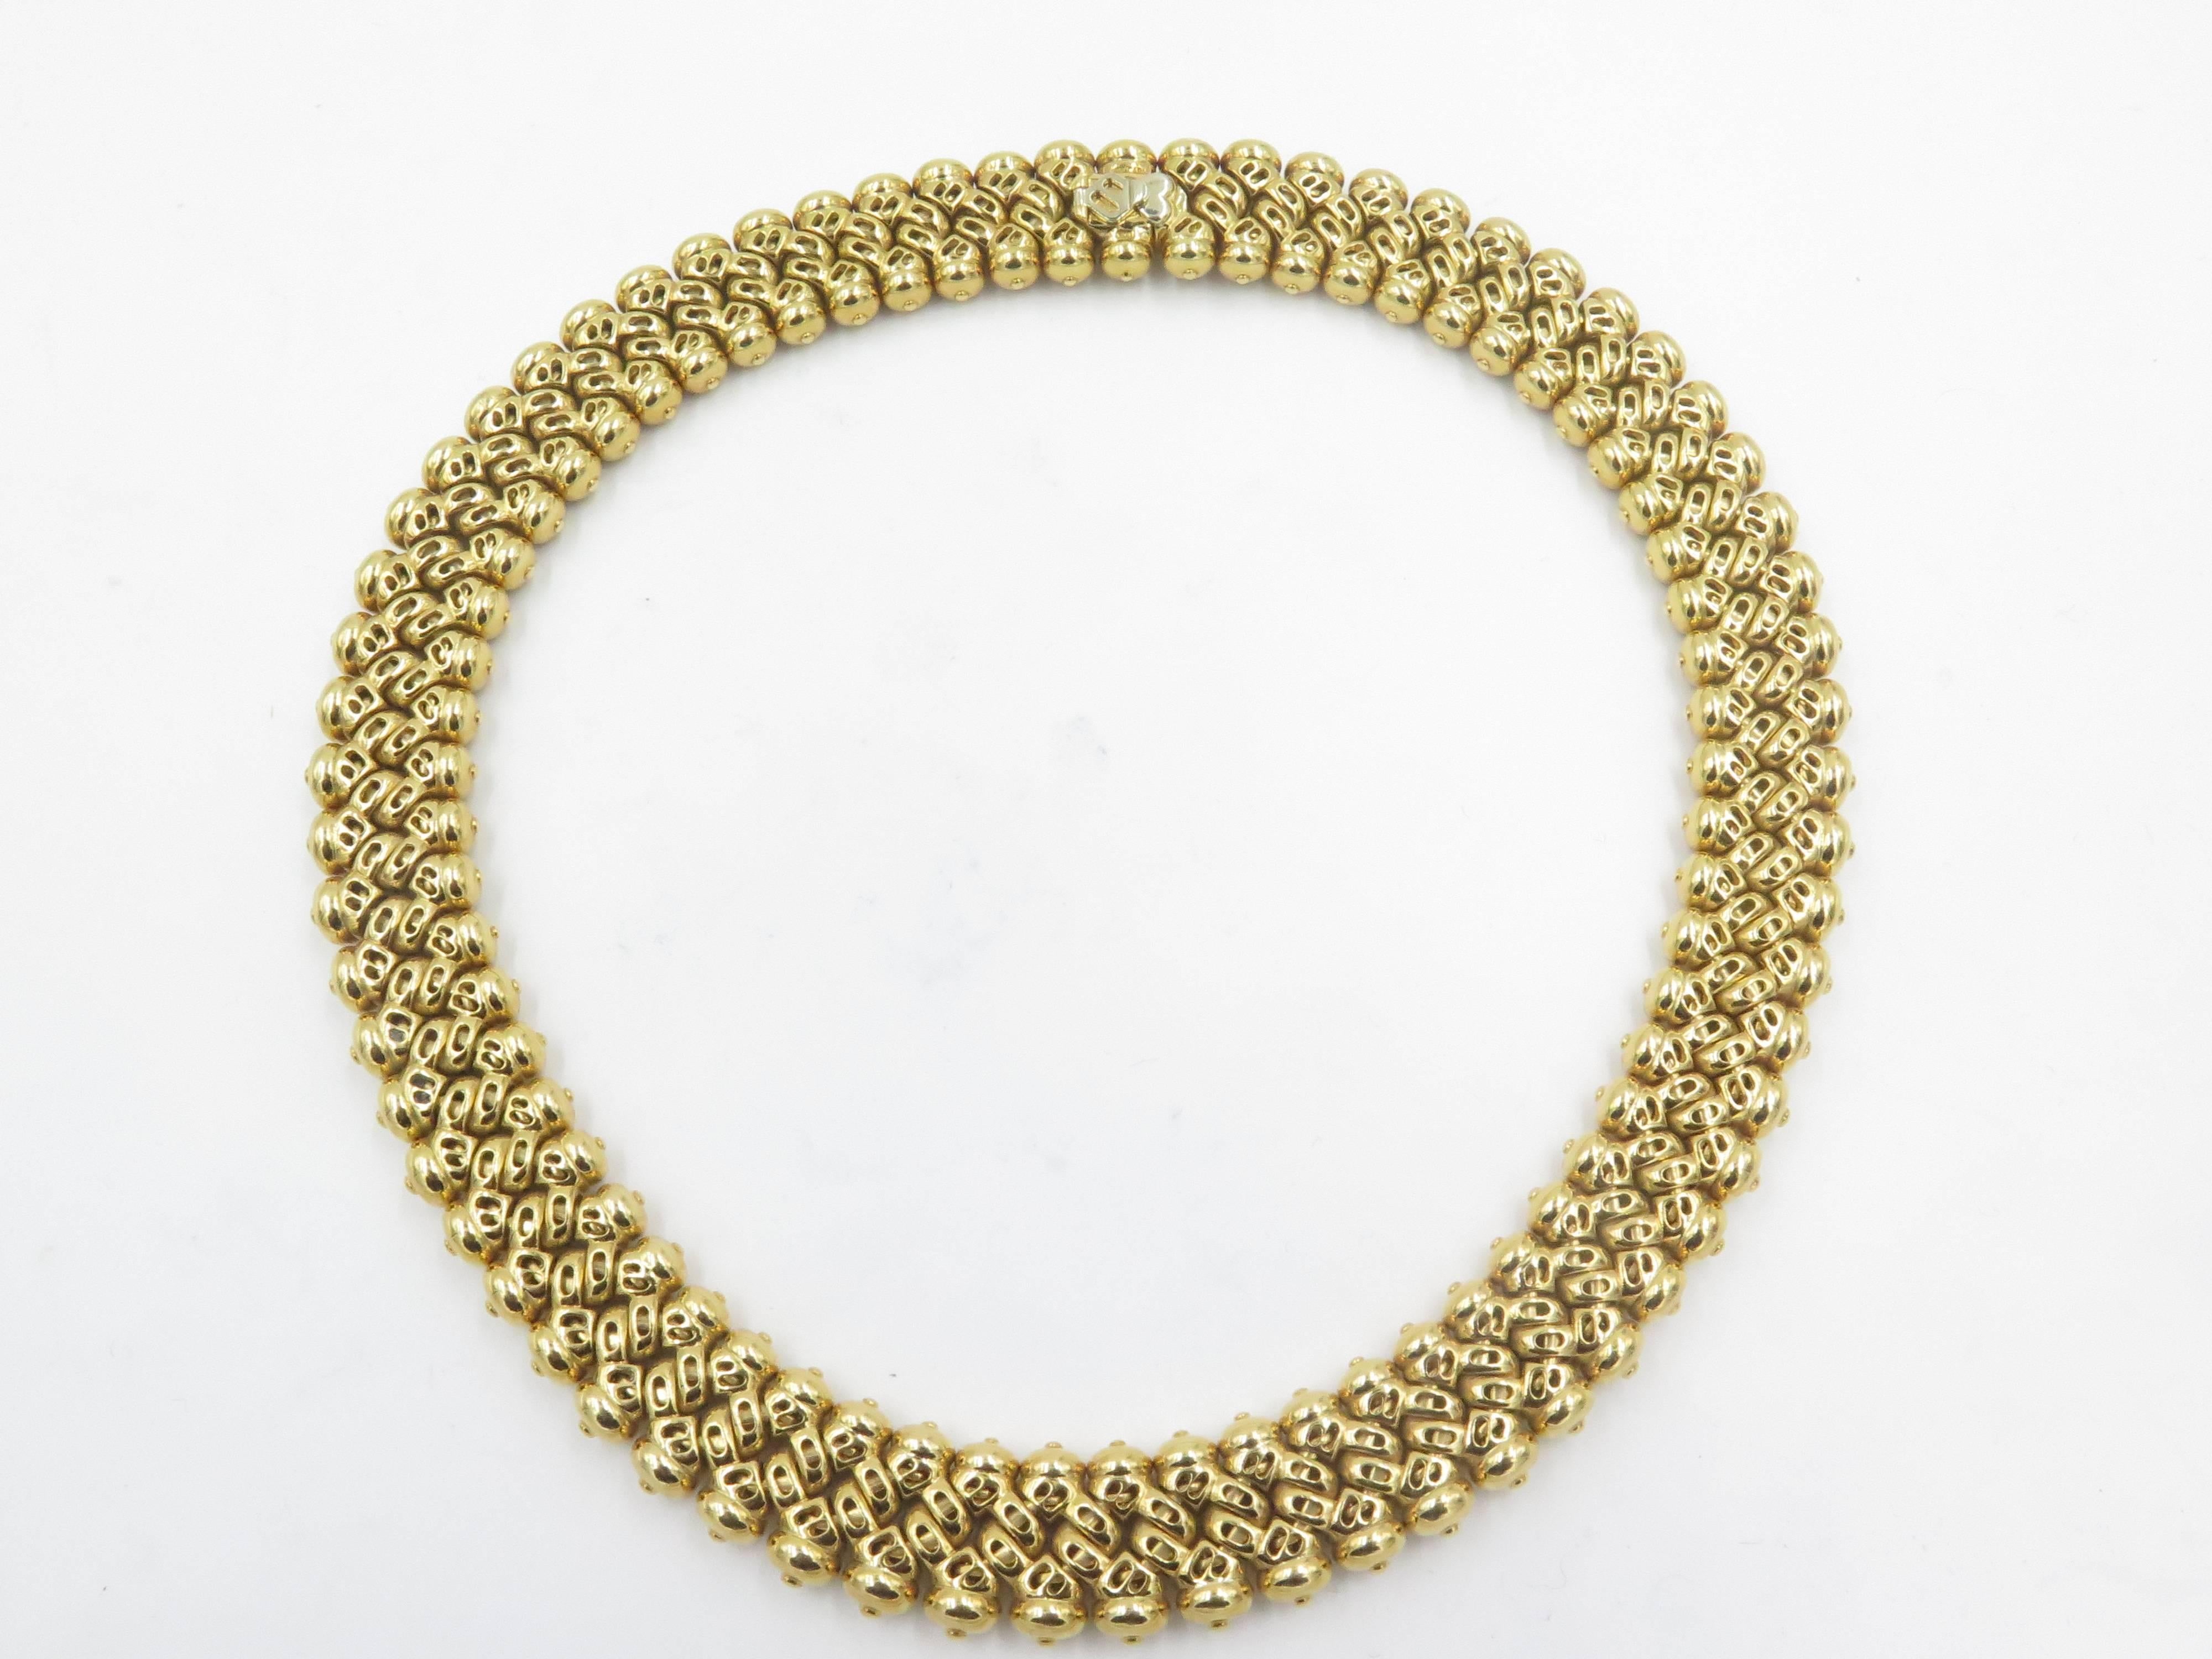 An 18 karat yellow gold and diamond necklace. Bulgari. Designed as twisted gold links enhanced by pave set diamonds.  660 diamonds. Gross weight is approximately 190.9 grams. Length is approximately 15 1/2 inches.
 